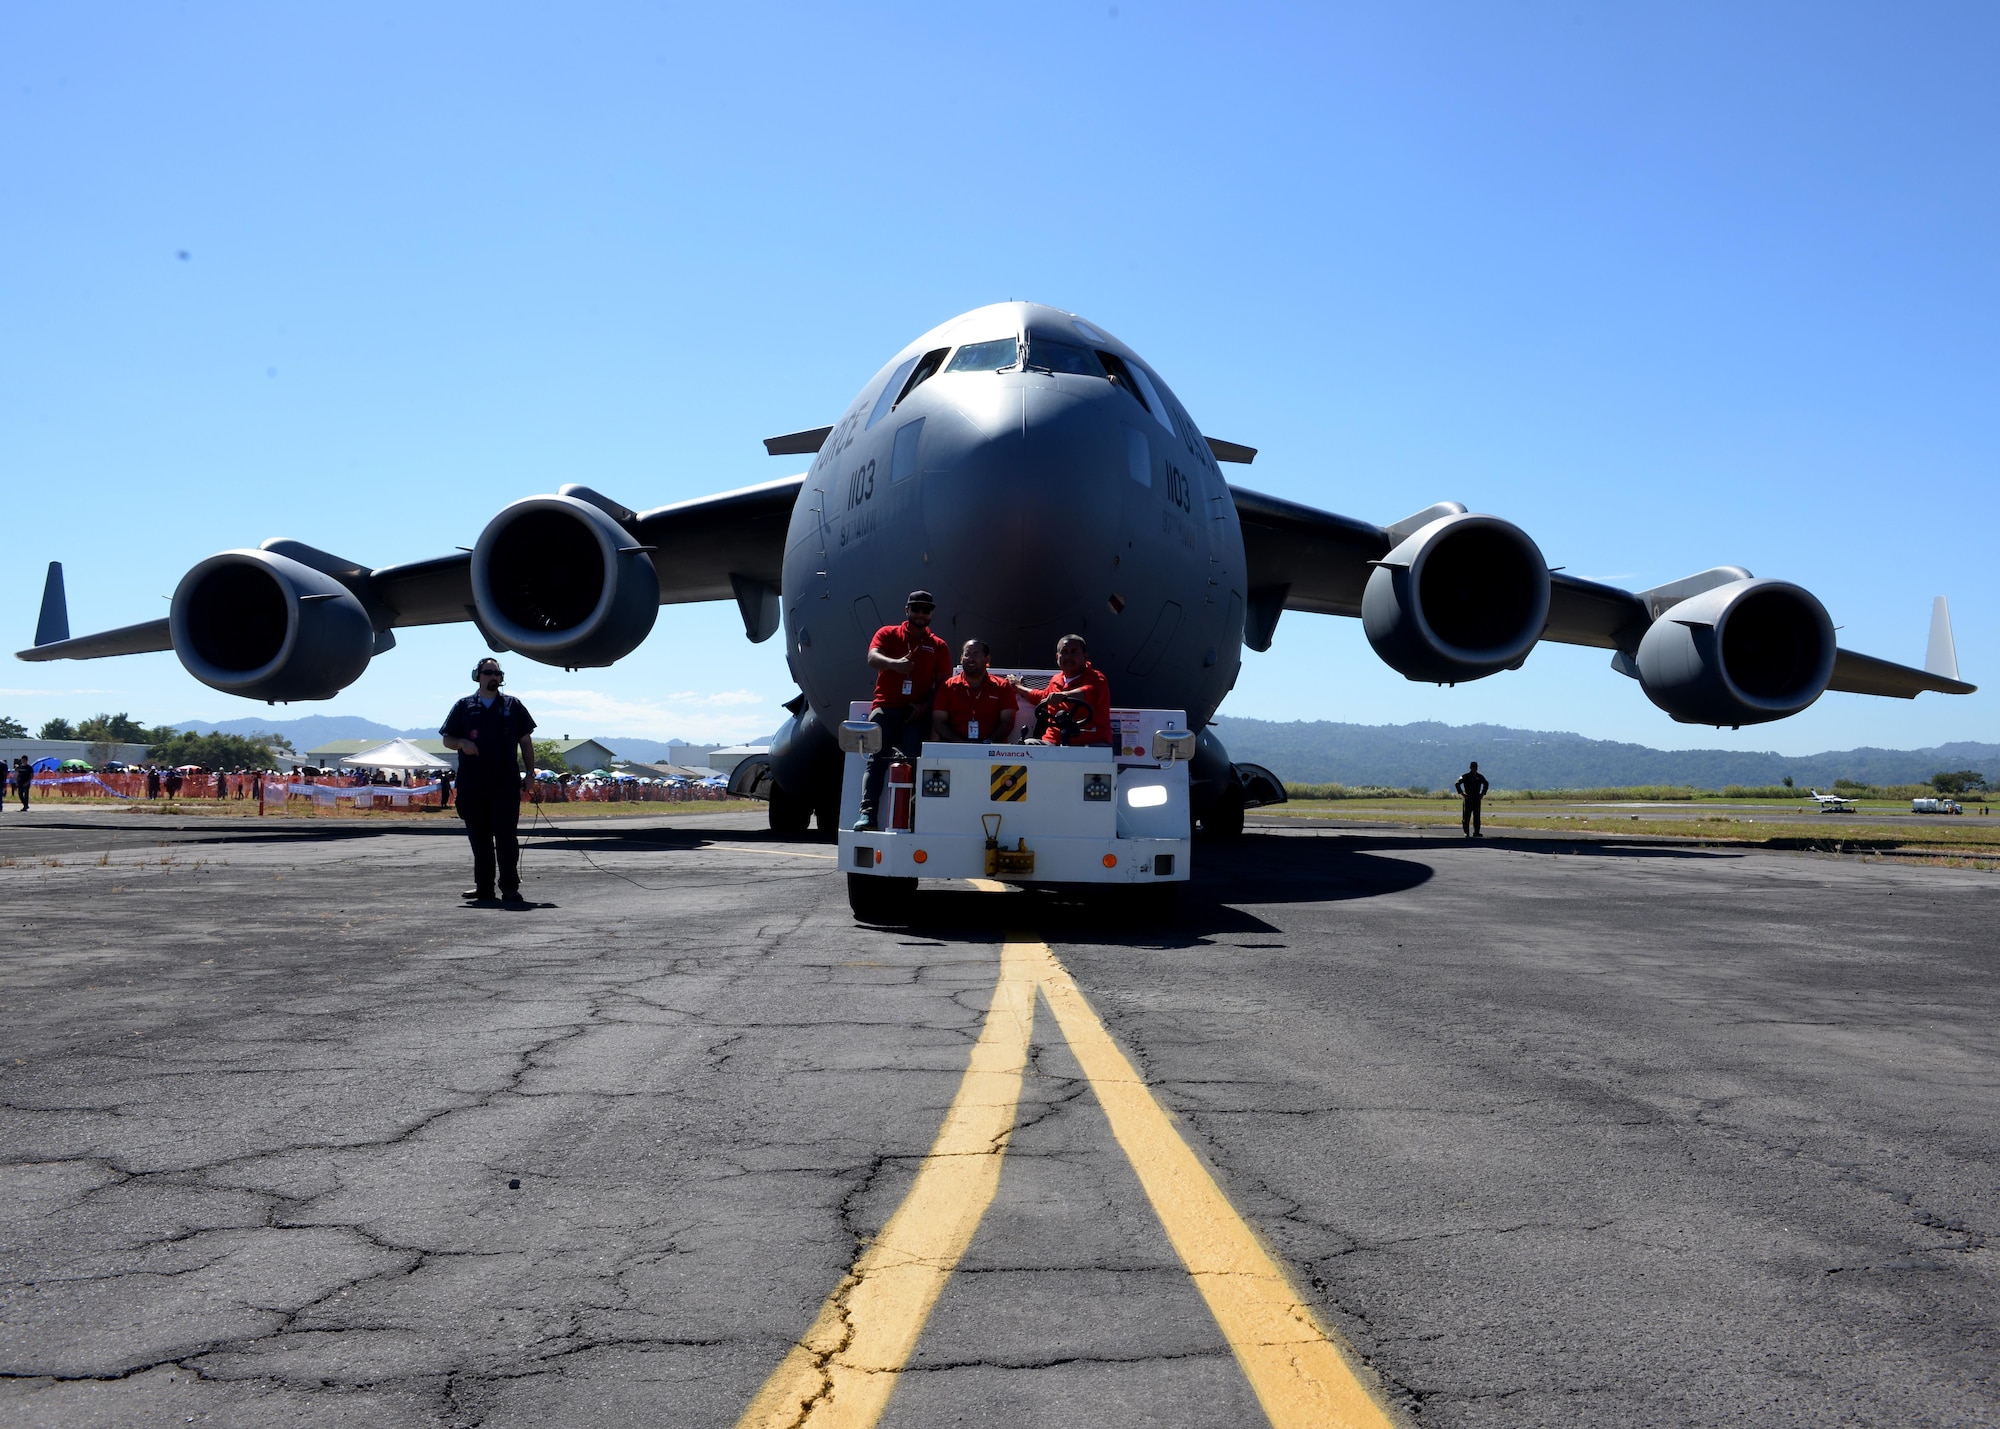 Ilopango International Airport workers, tow a U.S. Air Force C-17 Globemaster III cargo aircraft, 58th Airlift Squadron, on a runway at San Salvador, El Savador, Jan. 30, during the 2016 Ilopango Airshow. The C-17 was sent from Altus Air Force Base, Okla., to foster relationships between the U.S. and El Salvador. The aircraft was setup as a static display for the attendees to view and learn about some of its capabilities. (U.S. Air Force photo by Senior Airman Franklin R. Ramos/Released)